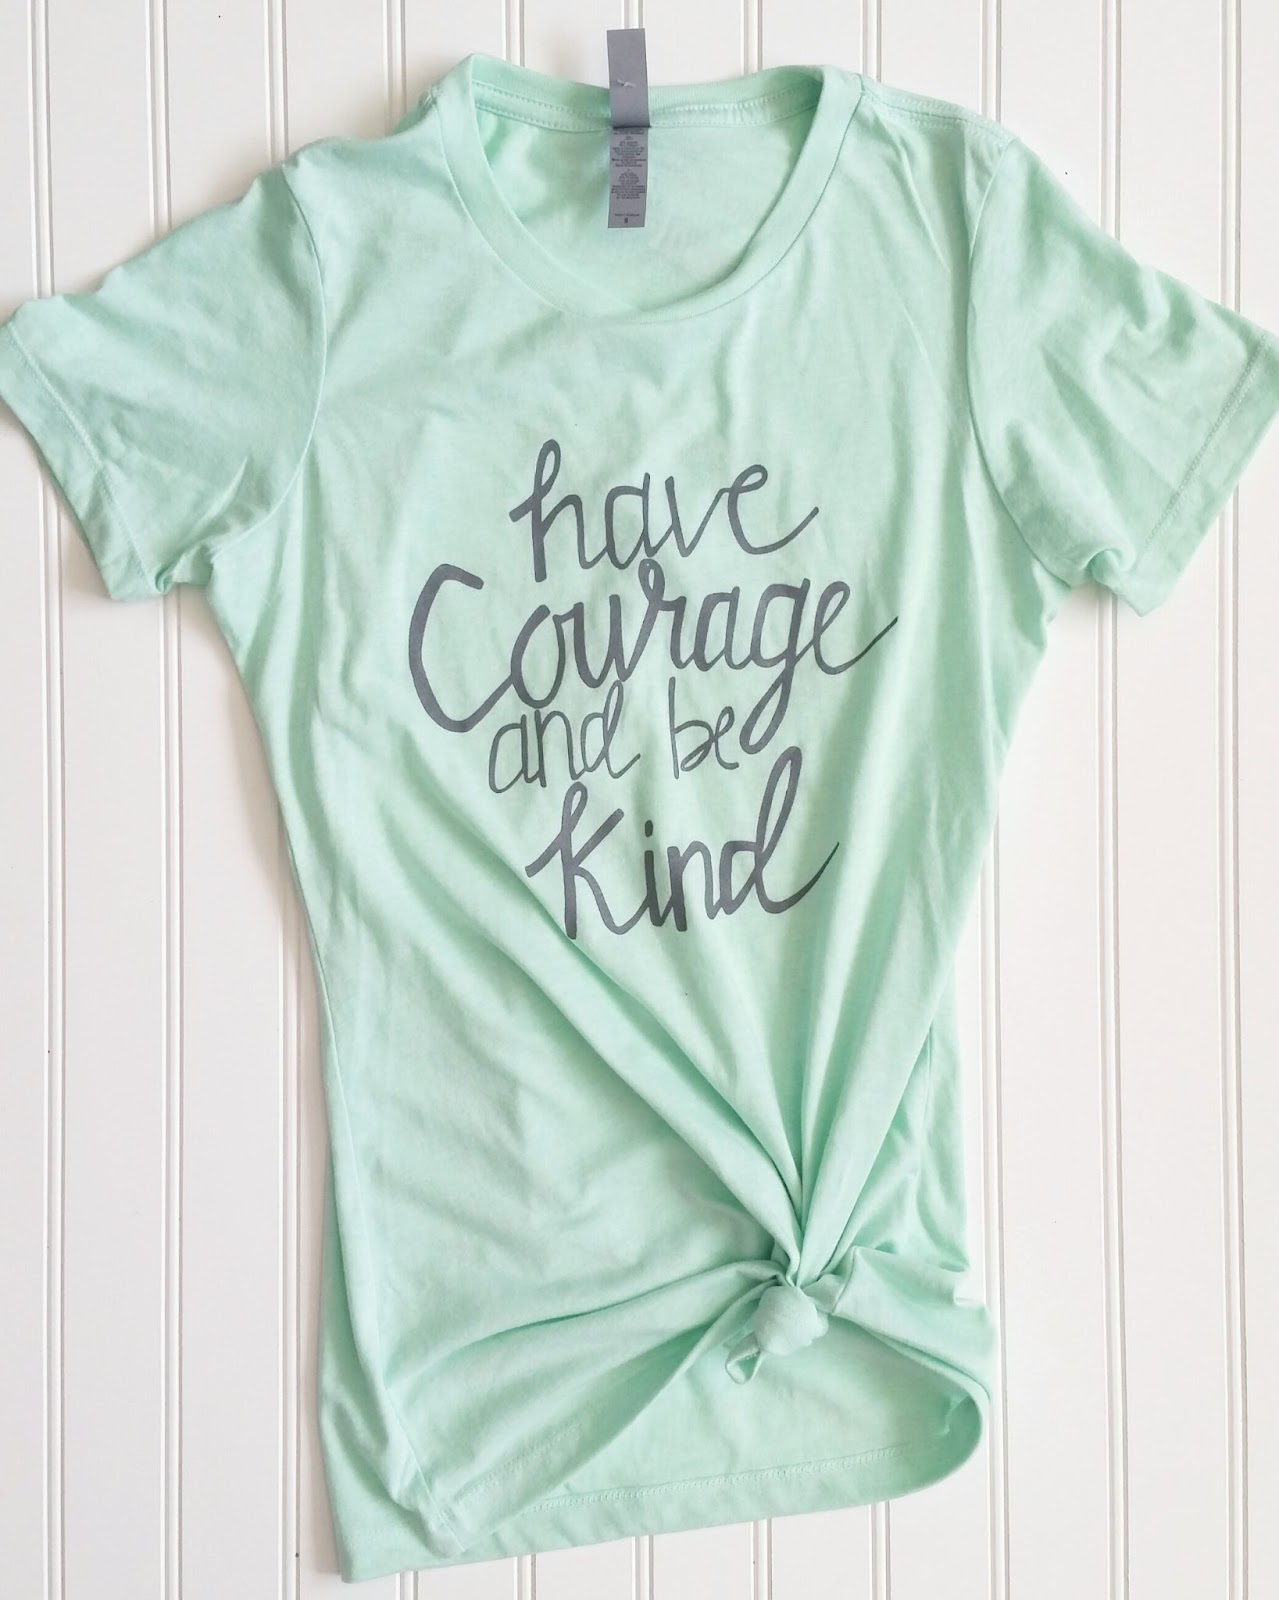 Copy of have courage side tie